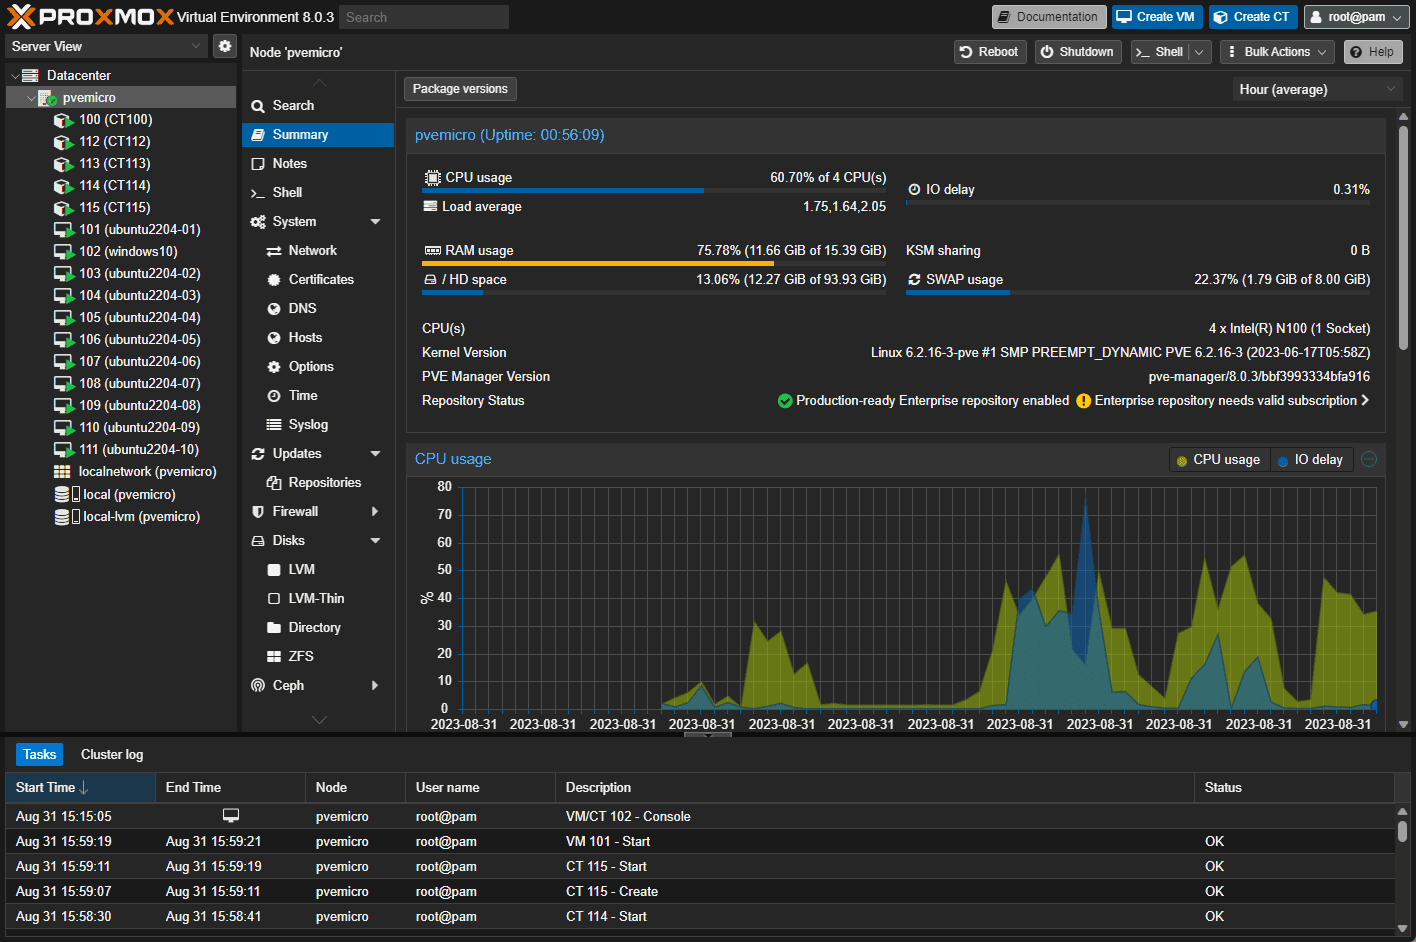 Many workloads running on the beelink mini pc running as a promox home server